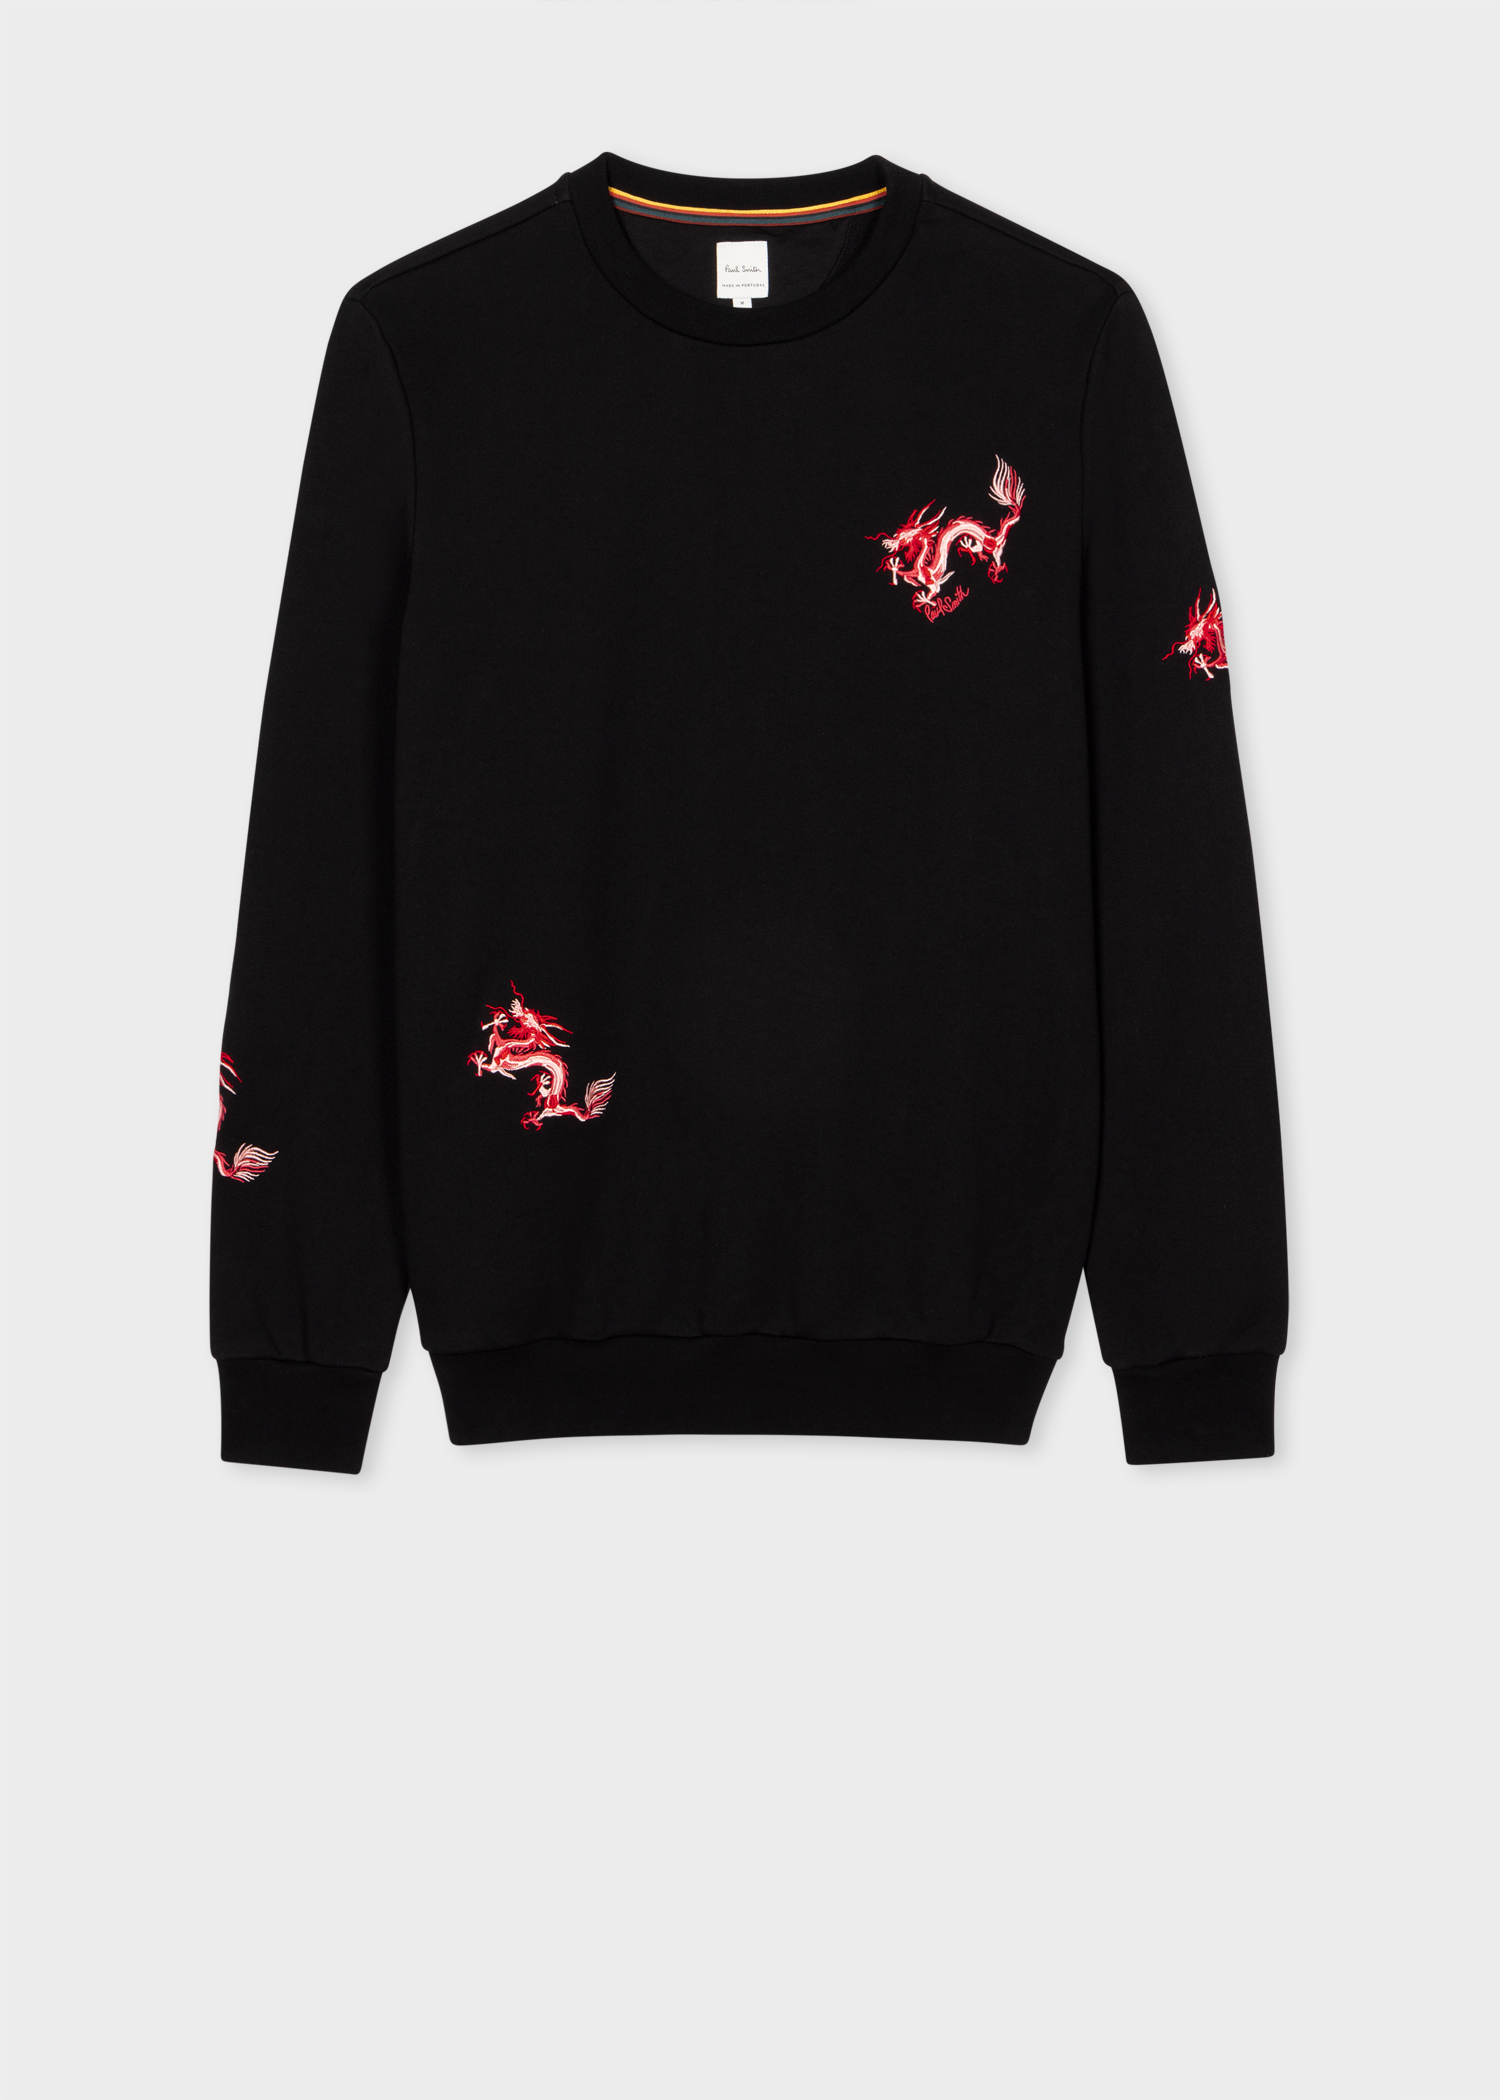 Men's Black 'Year Of The Dragon' Embroidered Sweatshirt